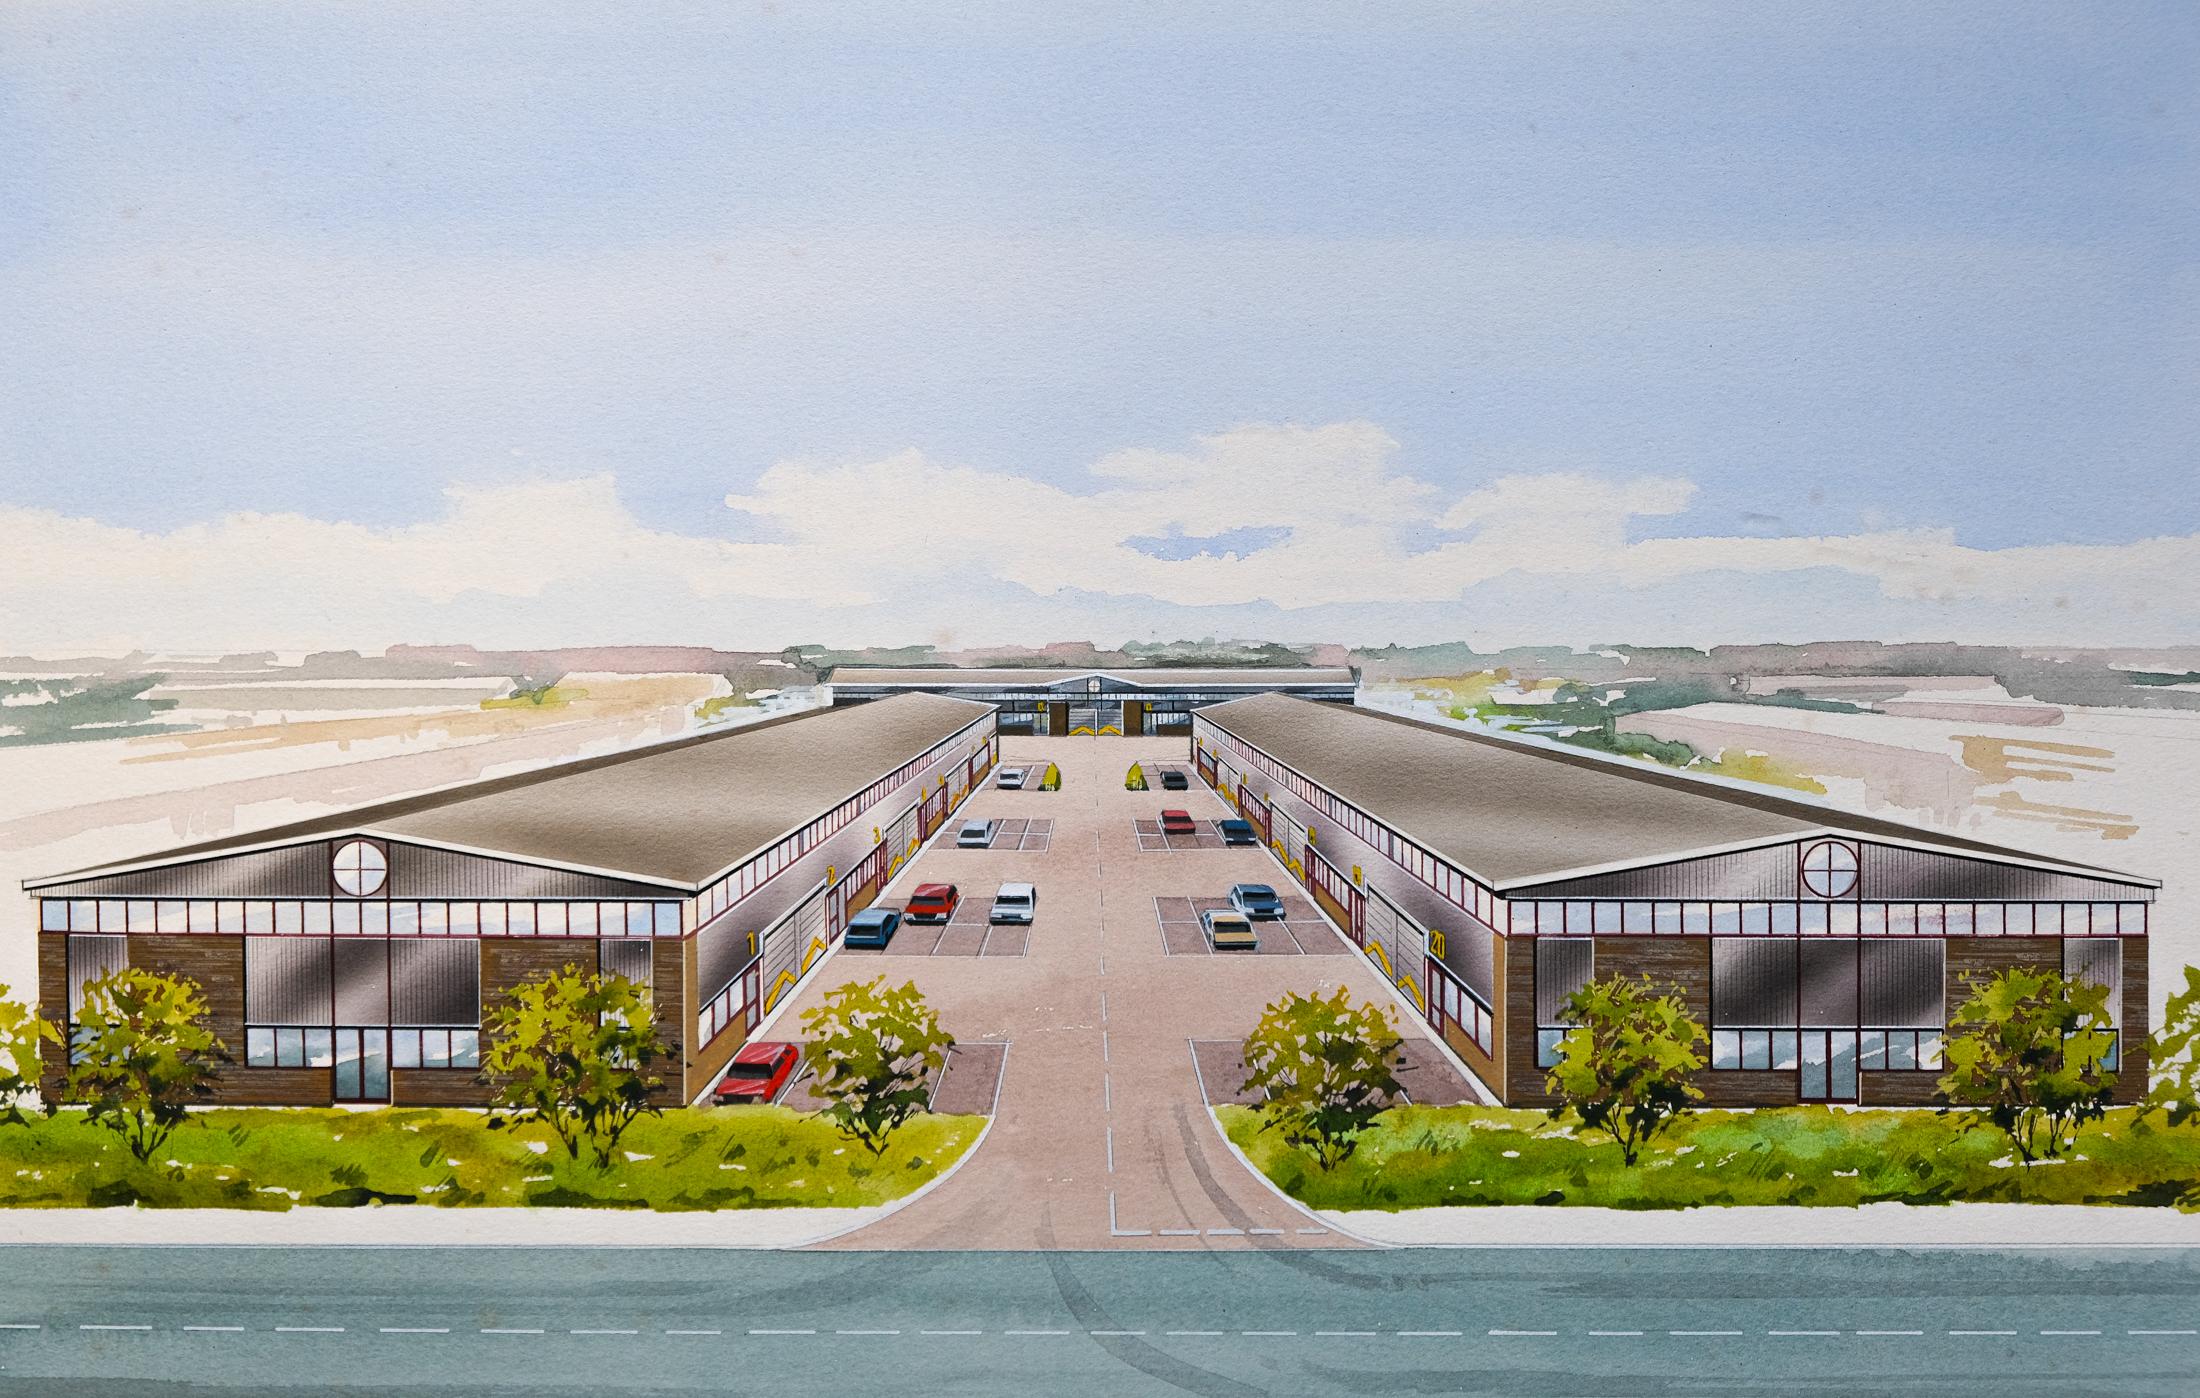 For sale, is a vintage architectural Postmodern design illustration or 'visualisation', on board, of an Industrial Estate in Northolt, UK dating from 1990. 

This unique airbrush and watercoloured work is signed in pencil by the artist, 